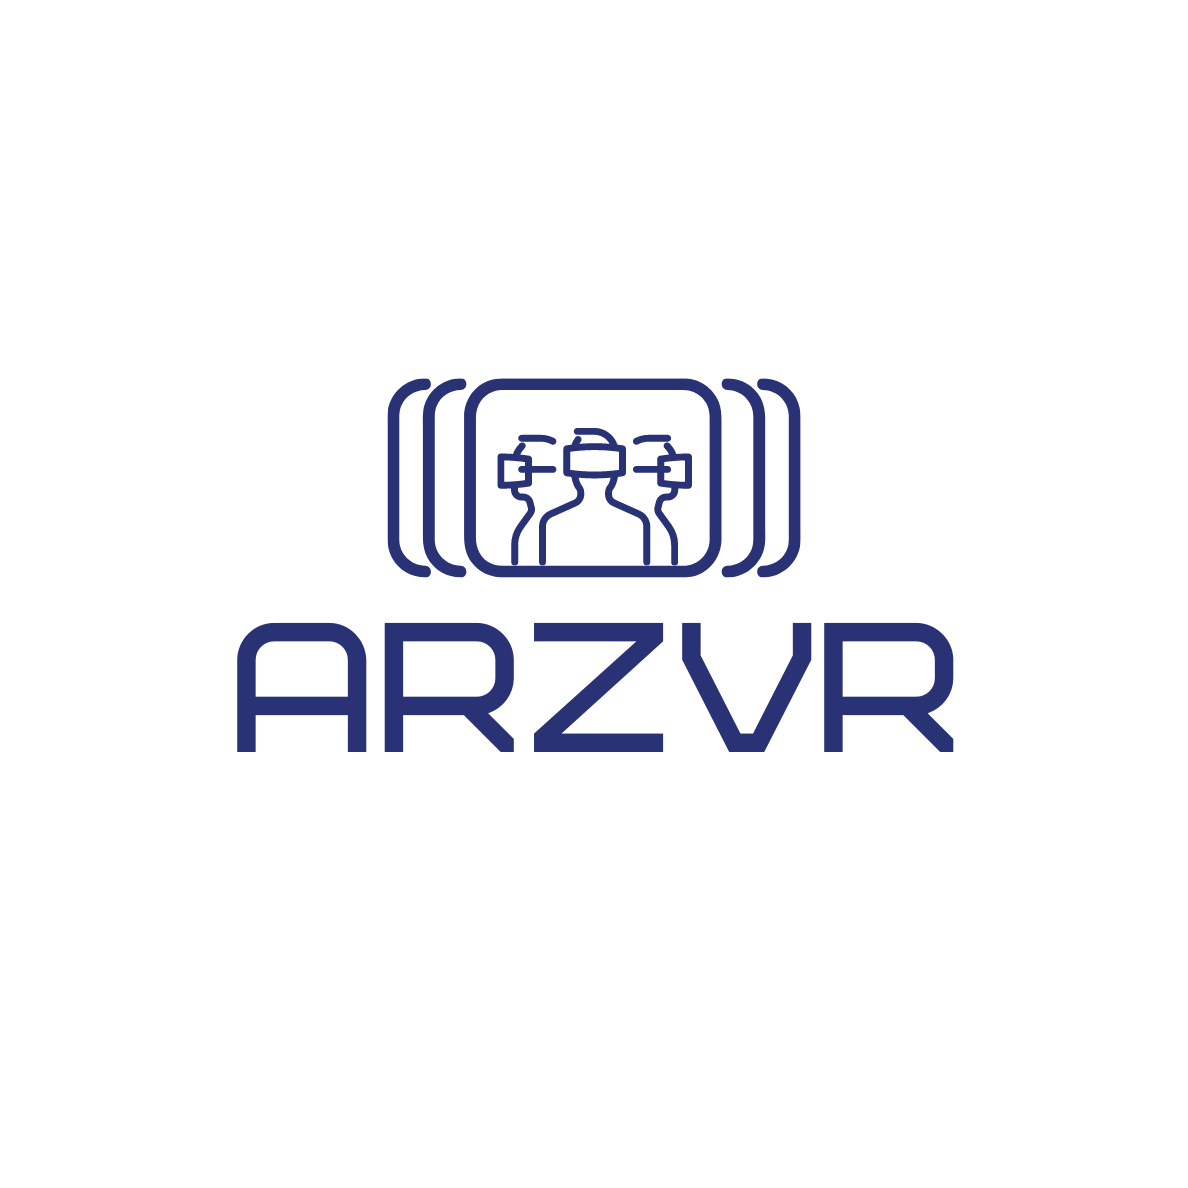 arzvr.com - domain for sale